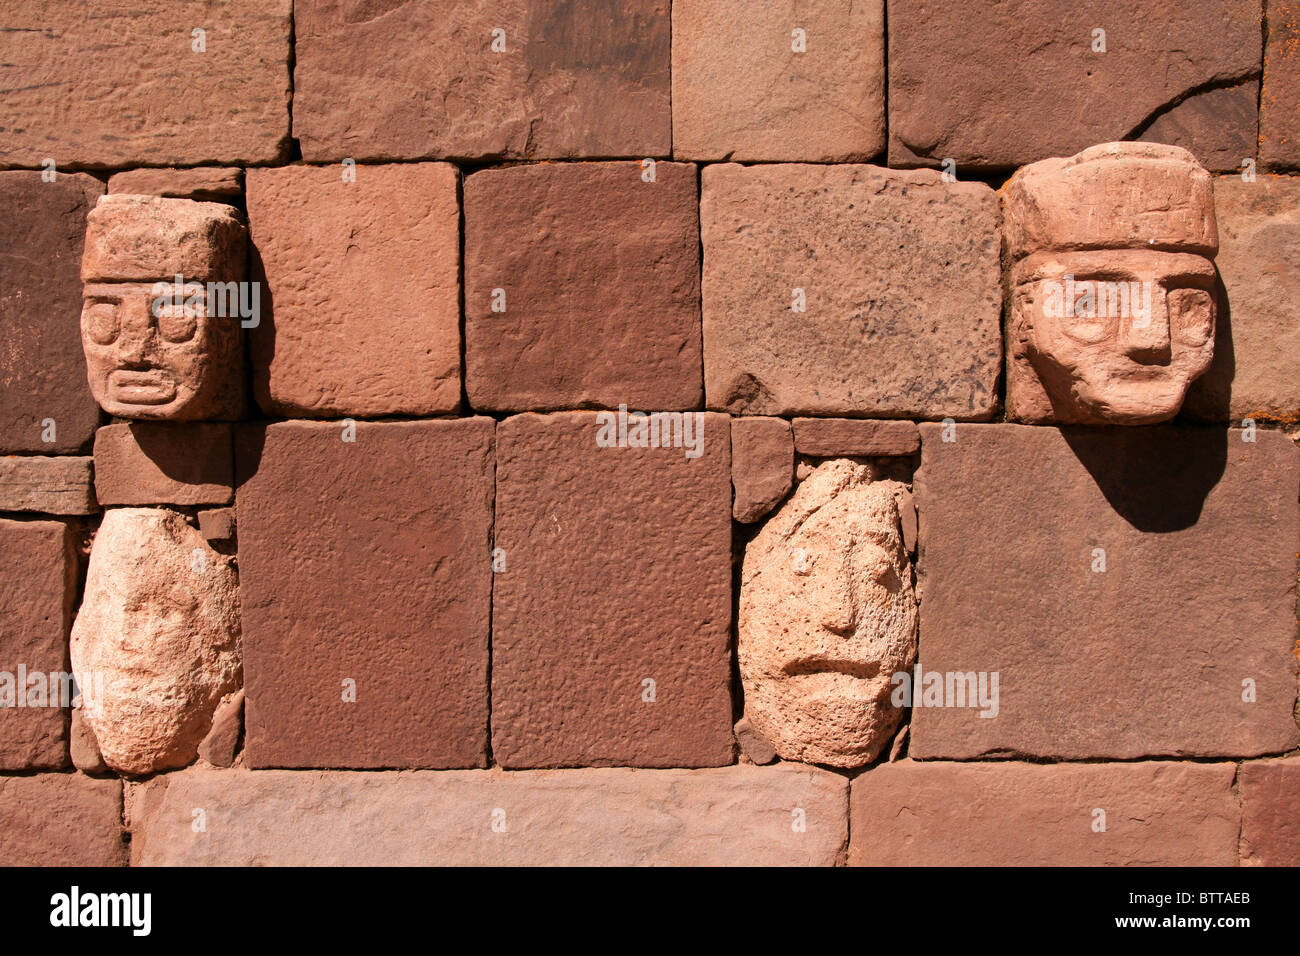 Multiple Stone faces built into a wall in Tiahuanaco or Tiwanaku, the capital of the Pre-Inca Civilization in Bolivia Stock Photo